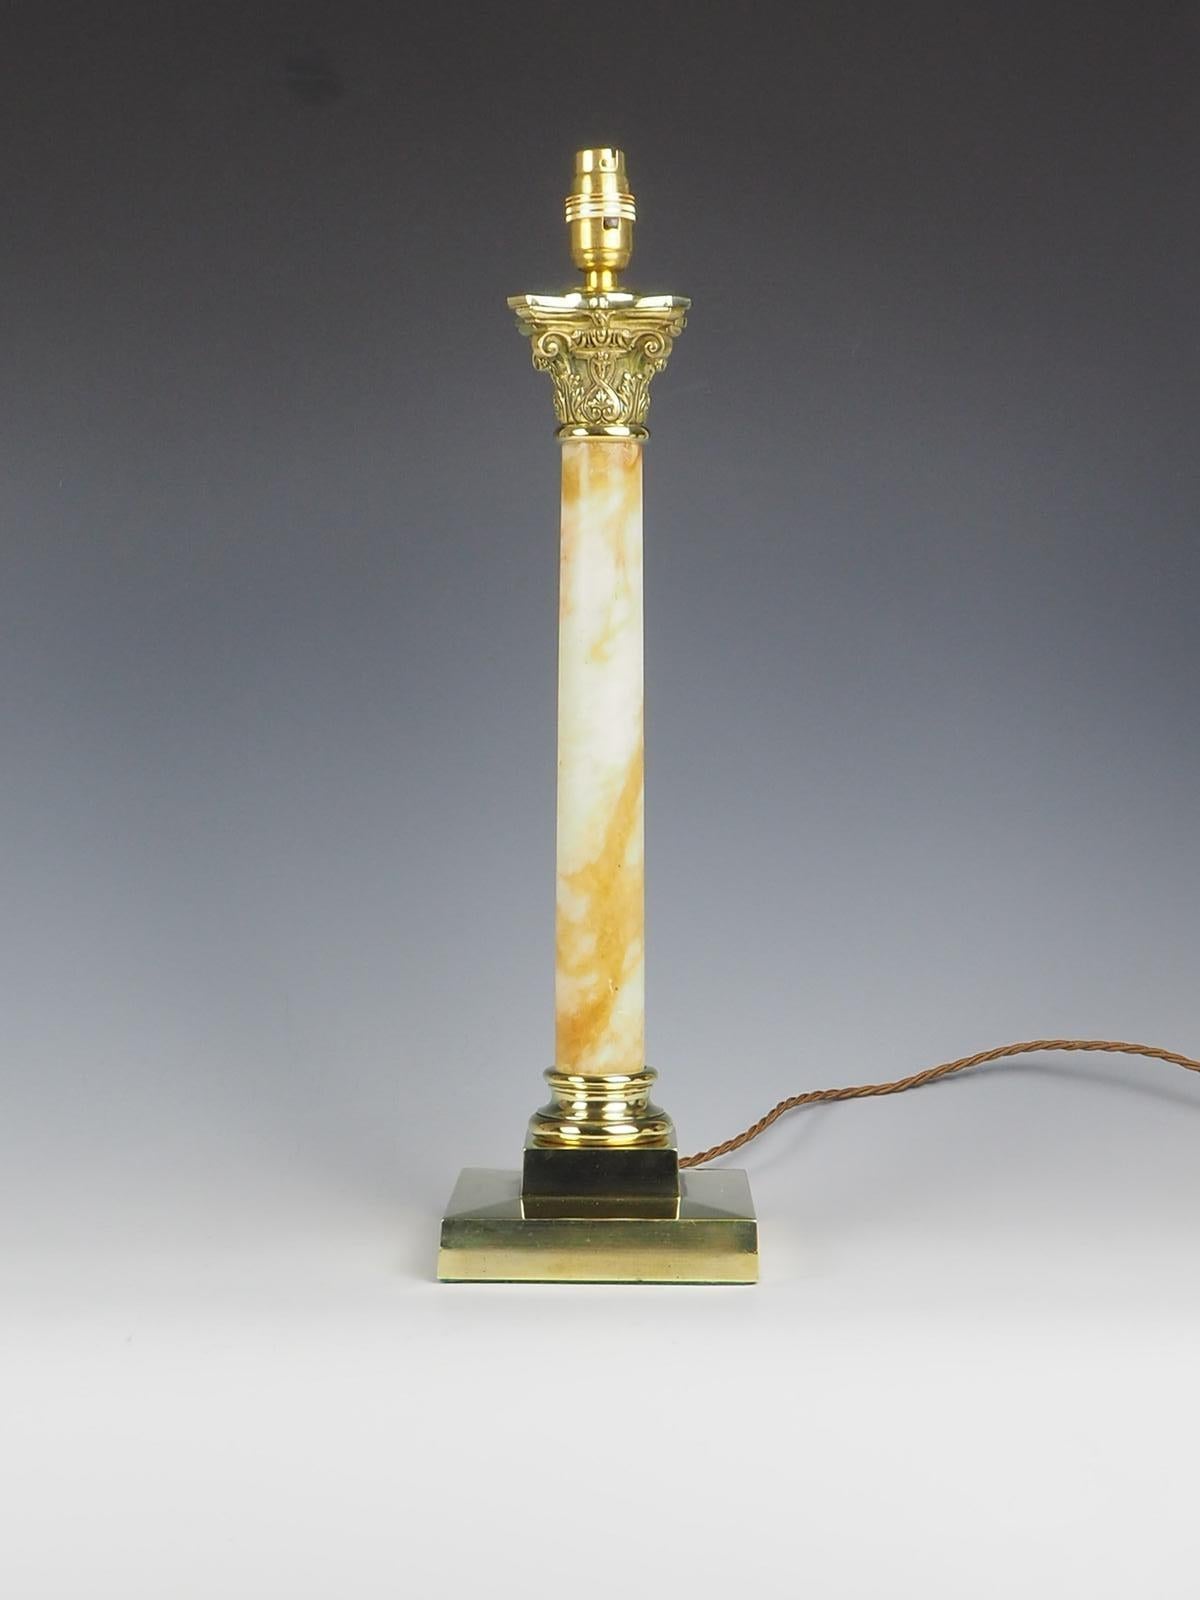 Antique Oynx and Brass Corinthian Table Lamp is a truly remarkable piece that exudes elegance and sophistication.

With its very large size and exceptional quality, it is sure to make a statement.

The lamp features a stunning Oynx shaft that leads